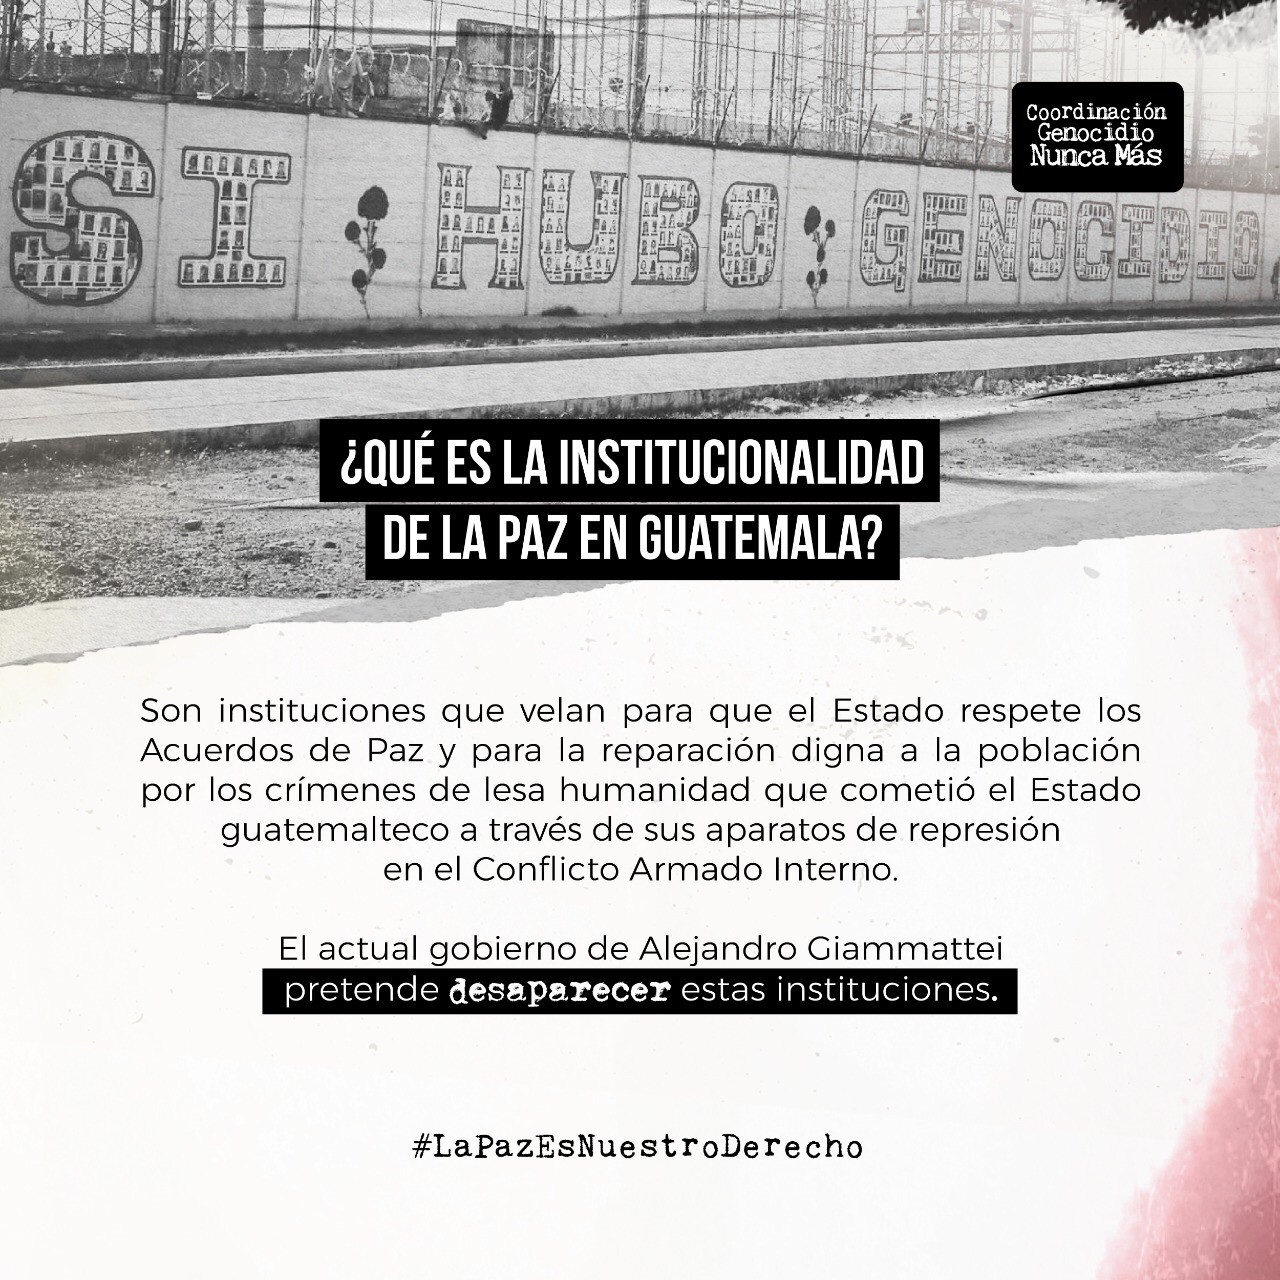 What is the institutional framework of peace in Guatemala? They are institutions that ensure that the State respects the Peace Accords and dignified reparation to the people for the crimes against humanity committed by the Guatemalan State through its repressive apparatus during the Internal Armed Conflict. The current government of Alejandro Giammatei intends to eliminate these institutions #PeaceIsOurRight